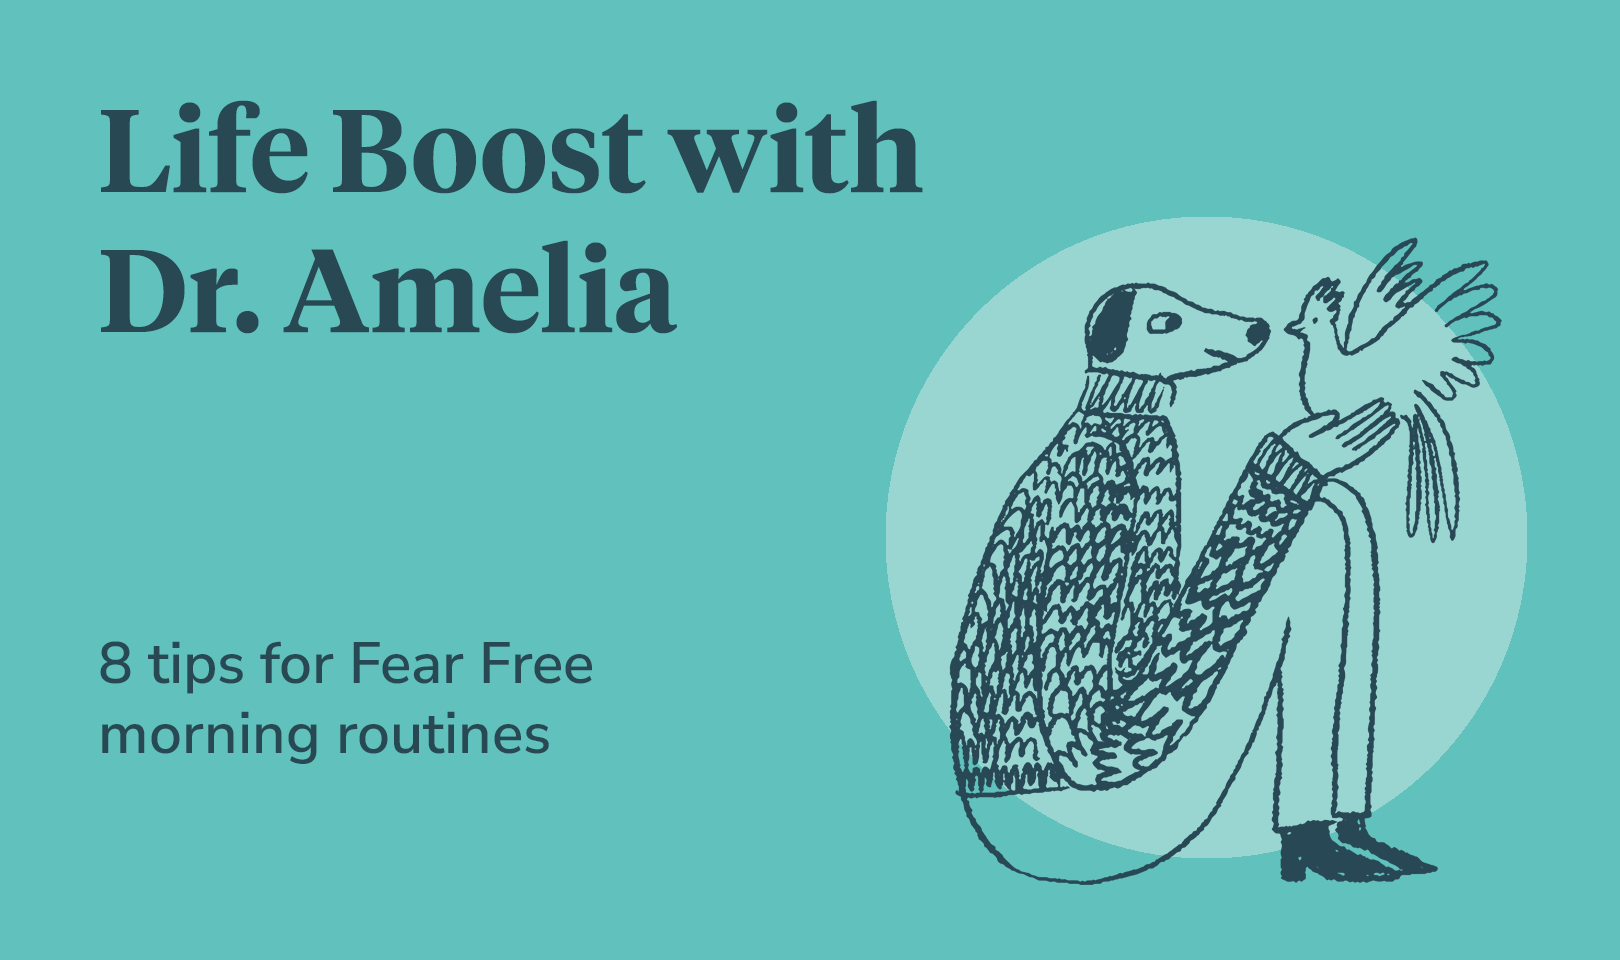 The text "Life Boost with Dr. Amelia: 8 tips for fear free morning routines" beside an image of an anthropomorphic dog sitting on the ground and holding a bird.